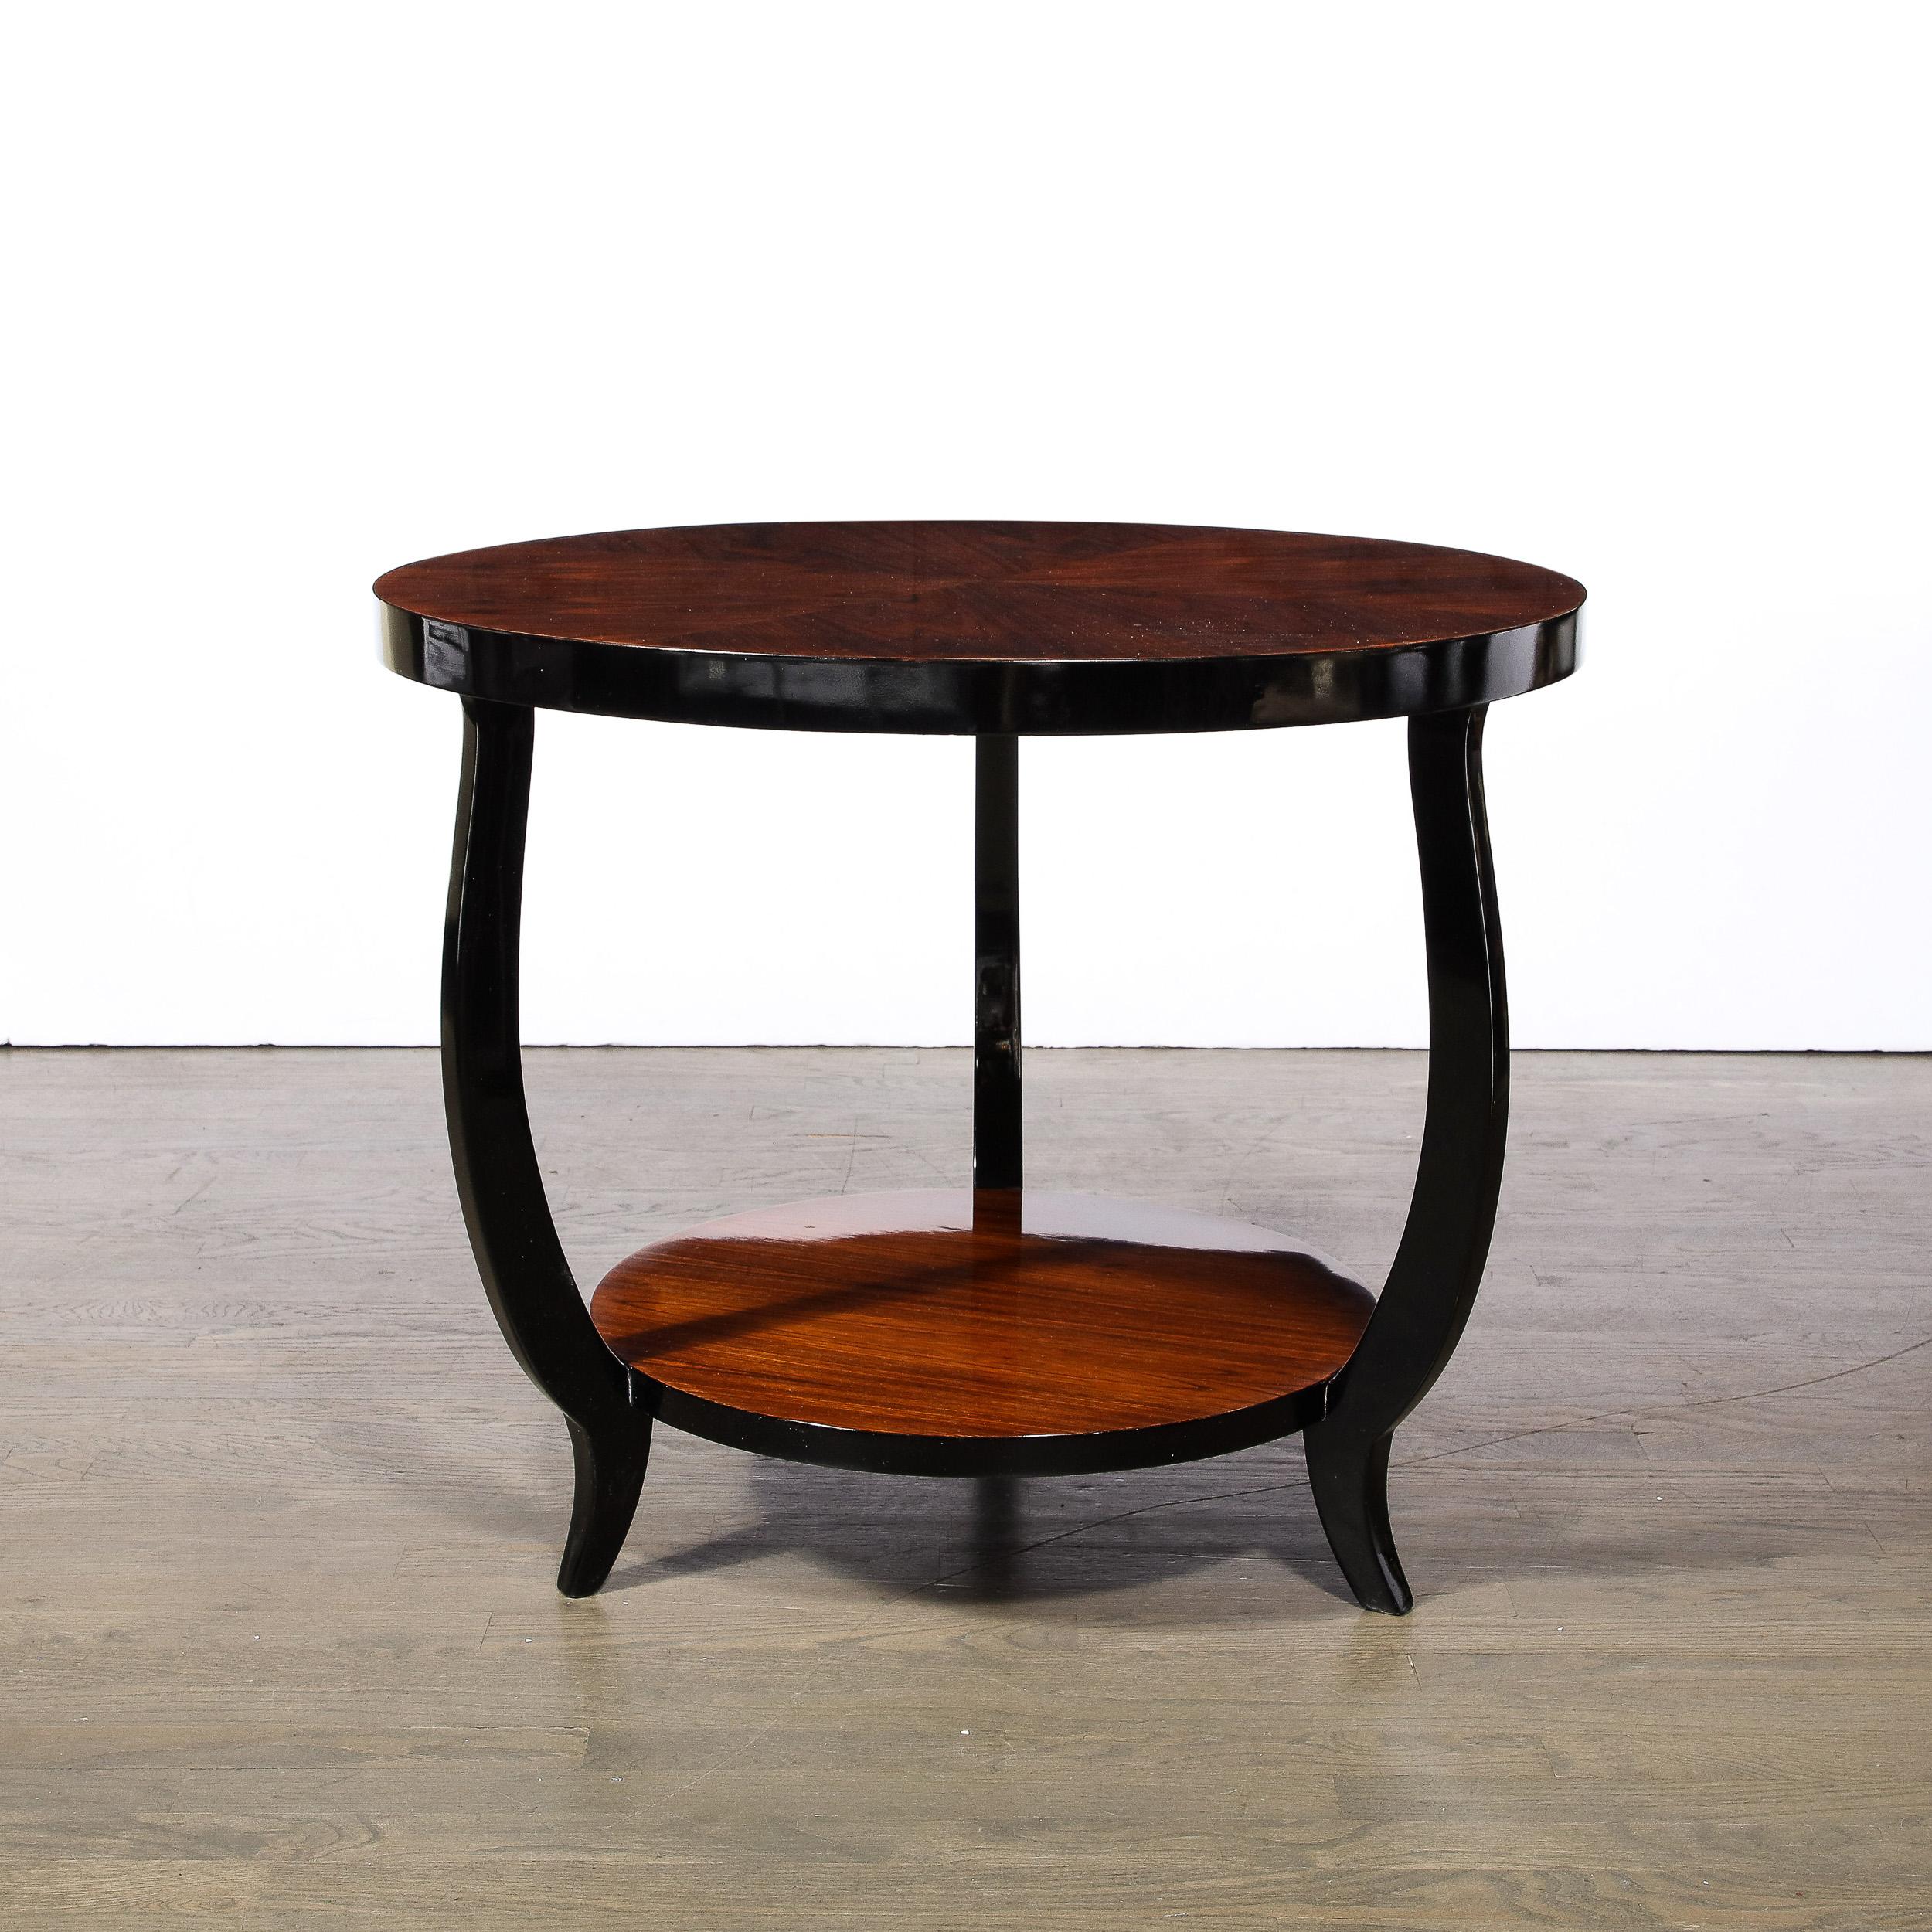 French Art Deco Two-Tier Gueridon Table in Book-matched Walnut & Black Lacquer  For Sale